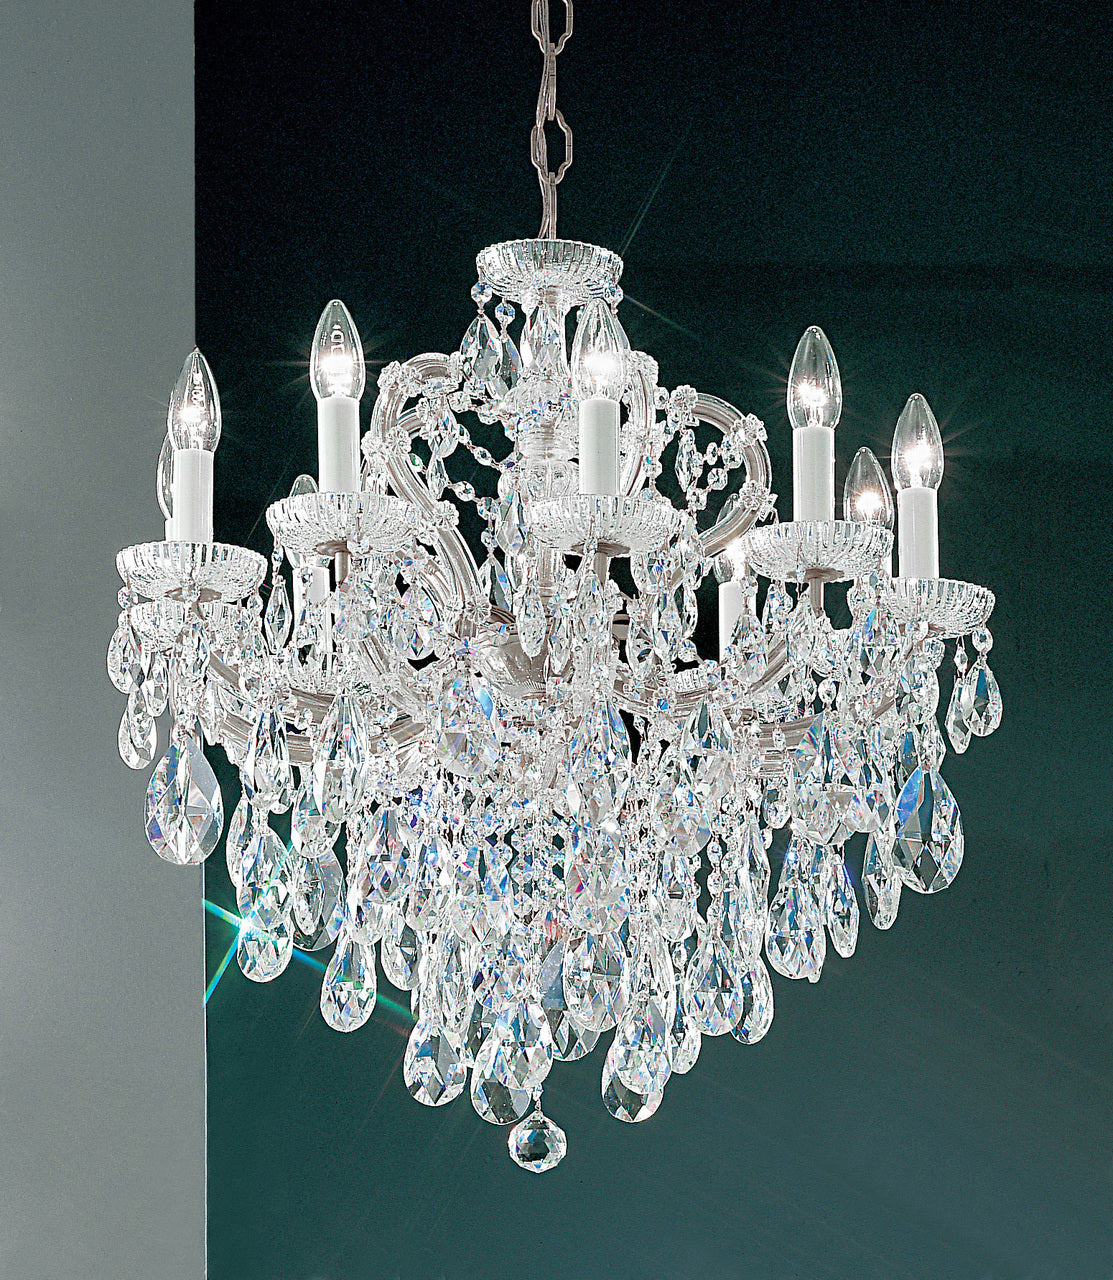 Classic Lighting 8120 CH SC Maria Theresa Traditional Crystal Chandelier in Chrome (Imported from Italy)